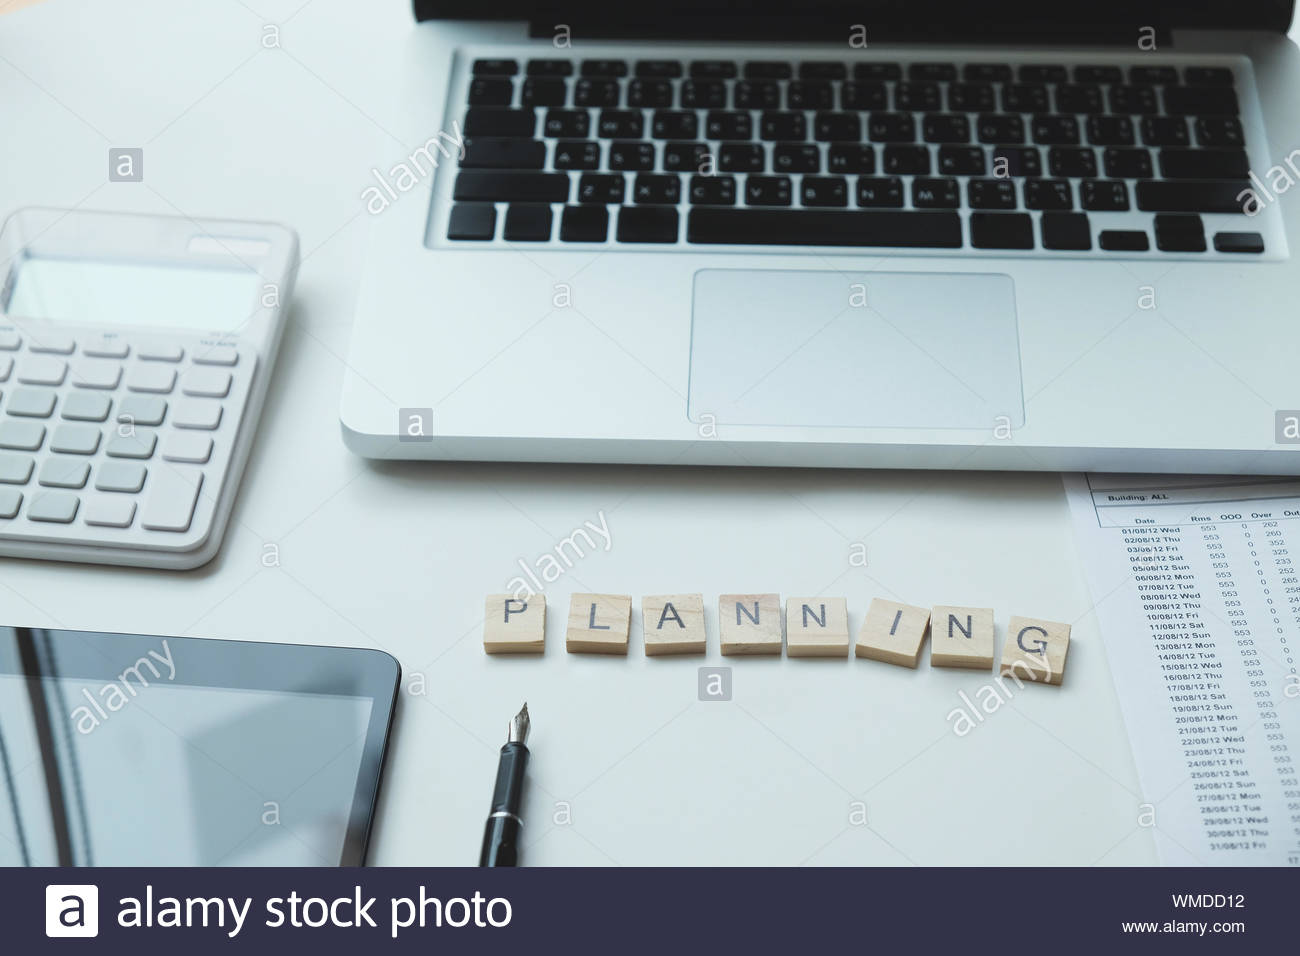 Planning Crossword On Business Working Table